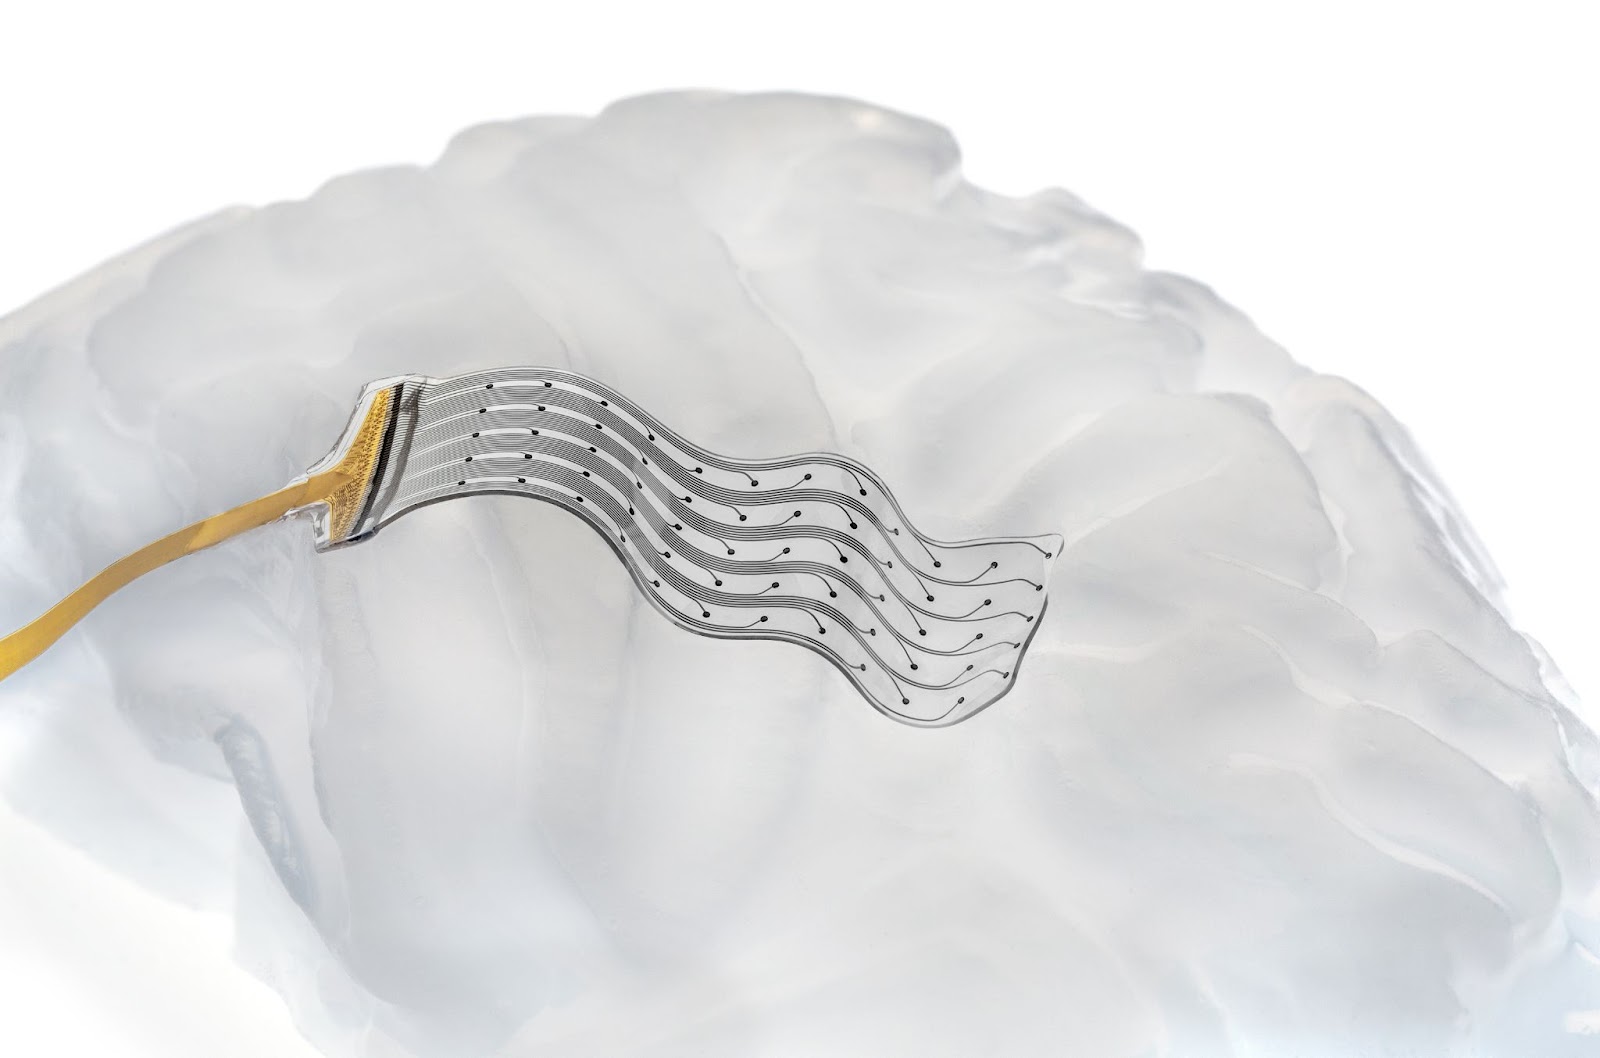 a flexible brain implant developed by Neurosoft on a model of the brain's surface